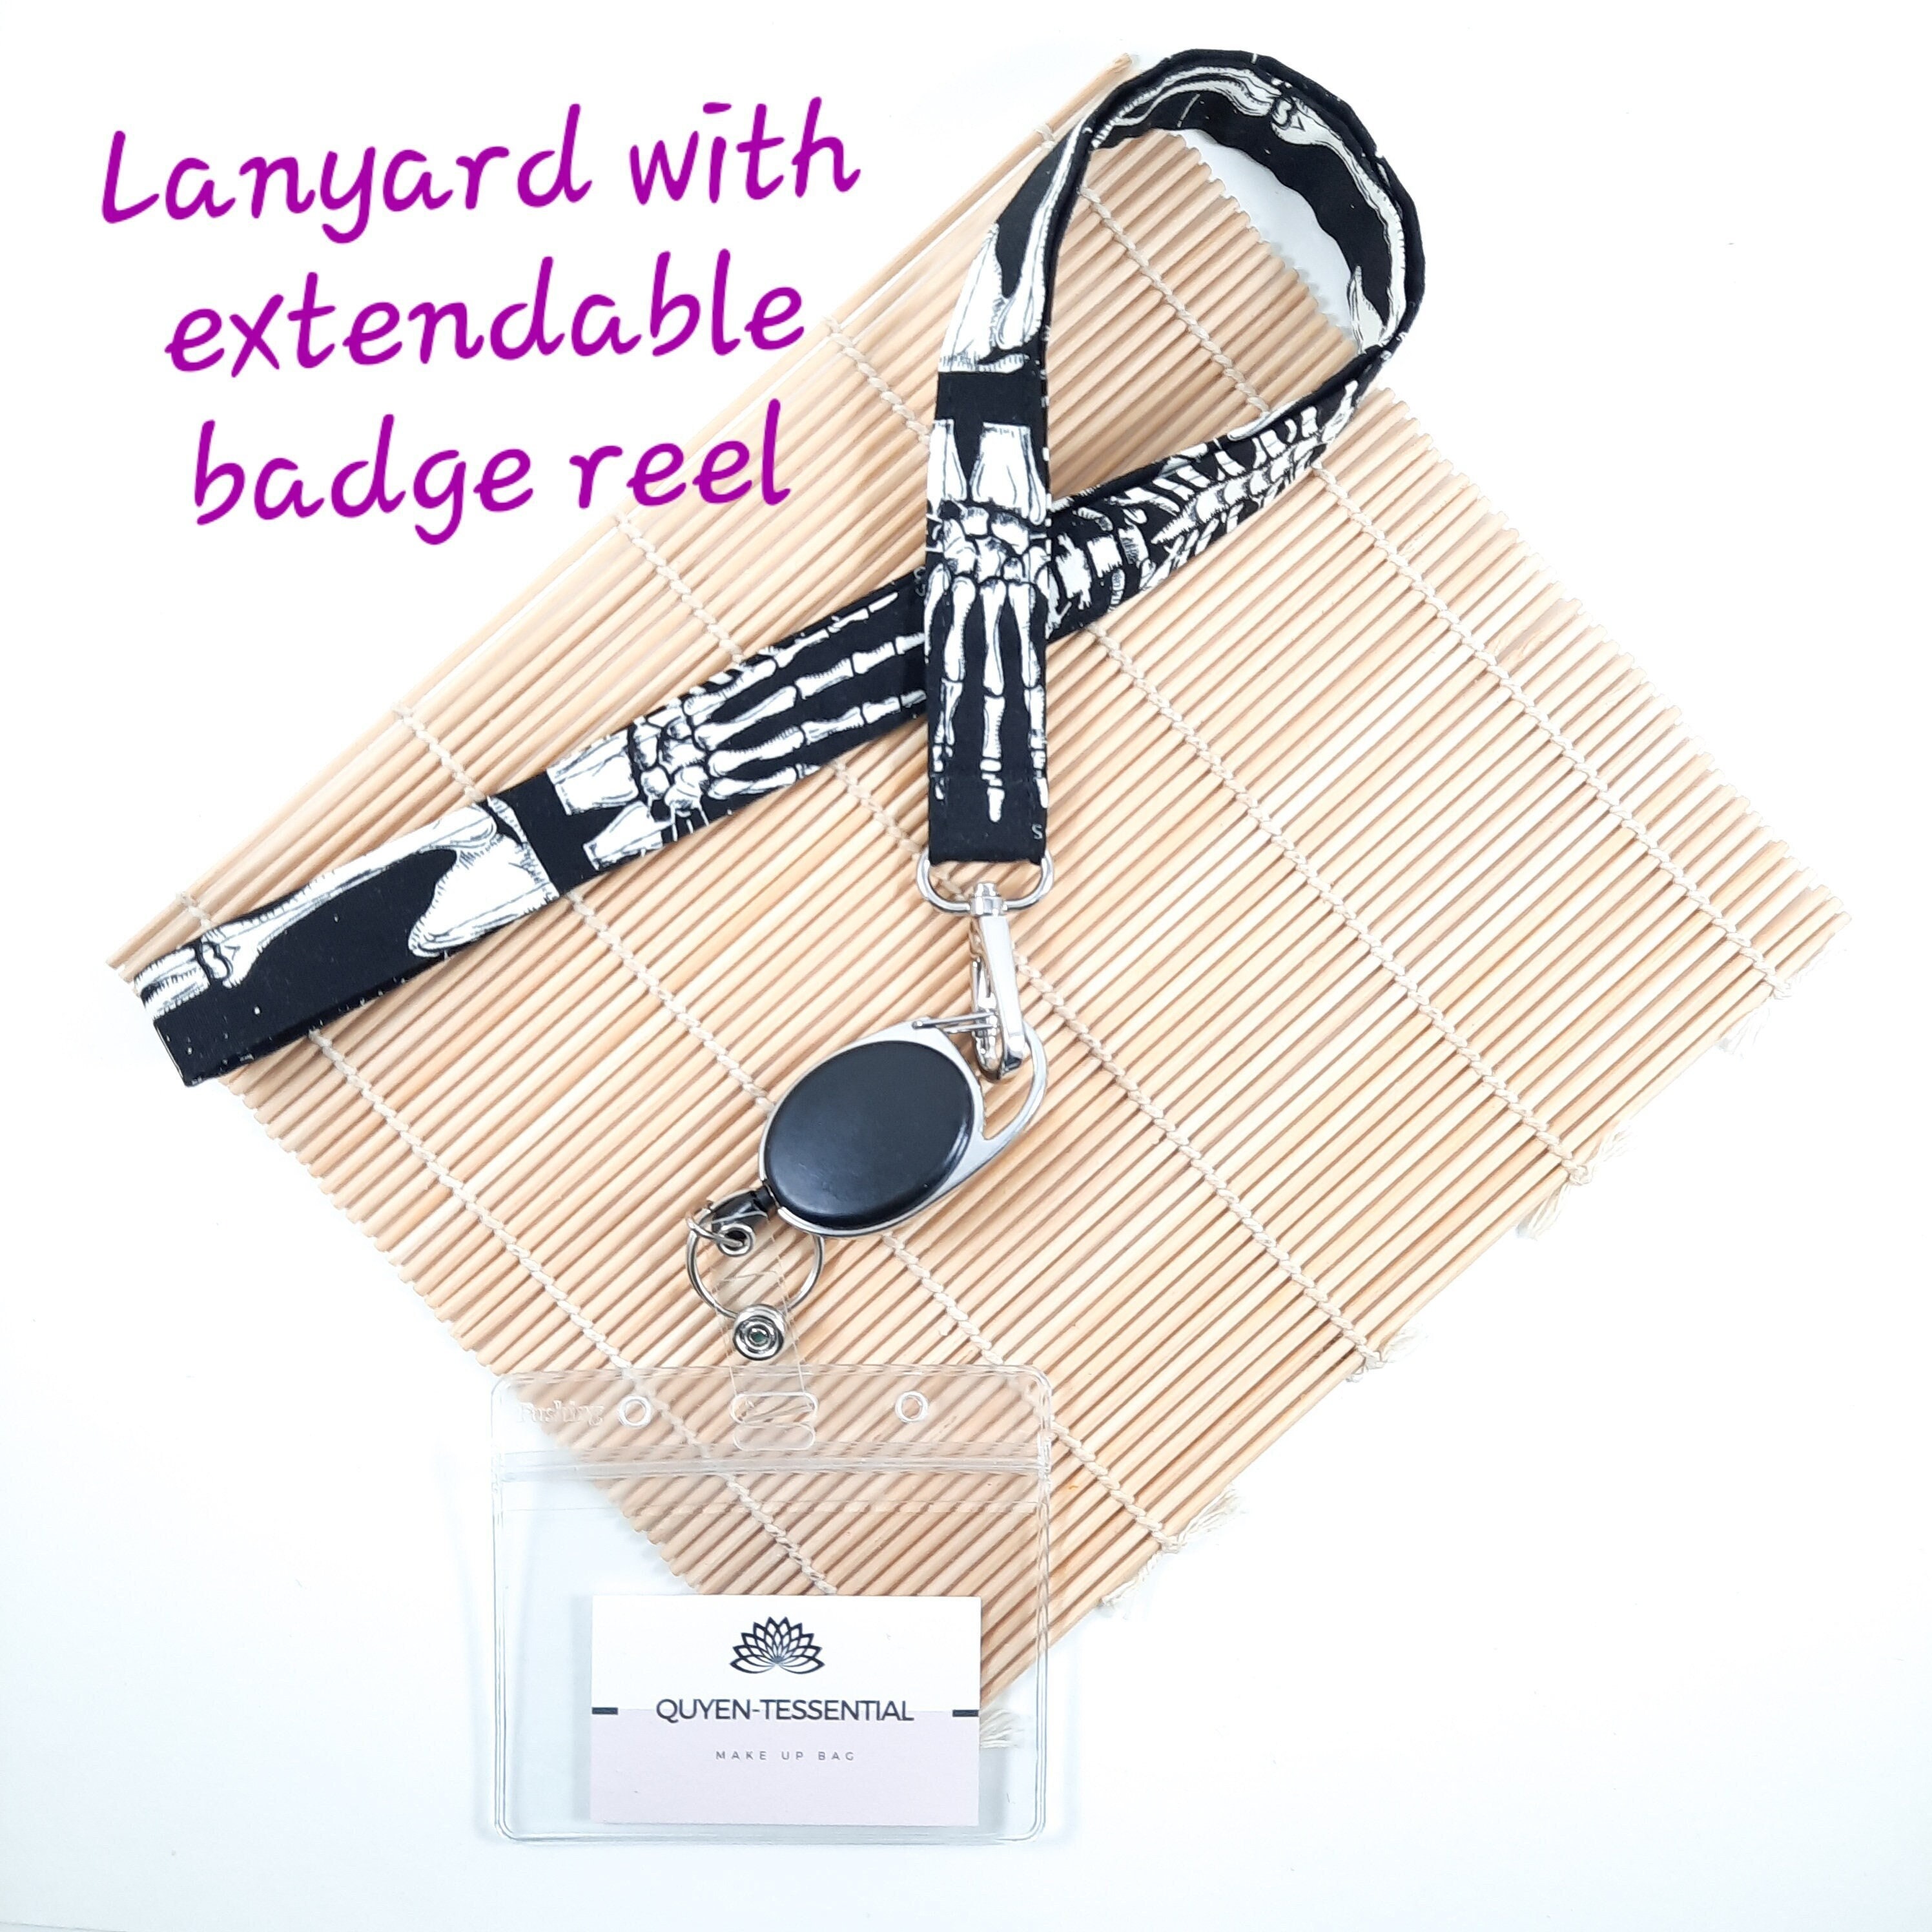 15 Pattern Lanyard With Extendable Badge Reel Durable and Stylish Neck  Strap for ID Badge, Gift Sets ,medical Student Midwife Gift UK 